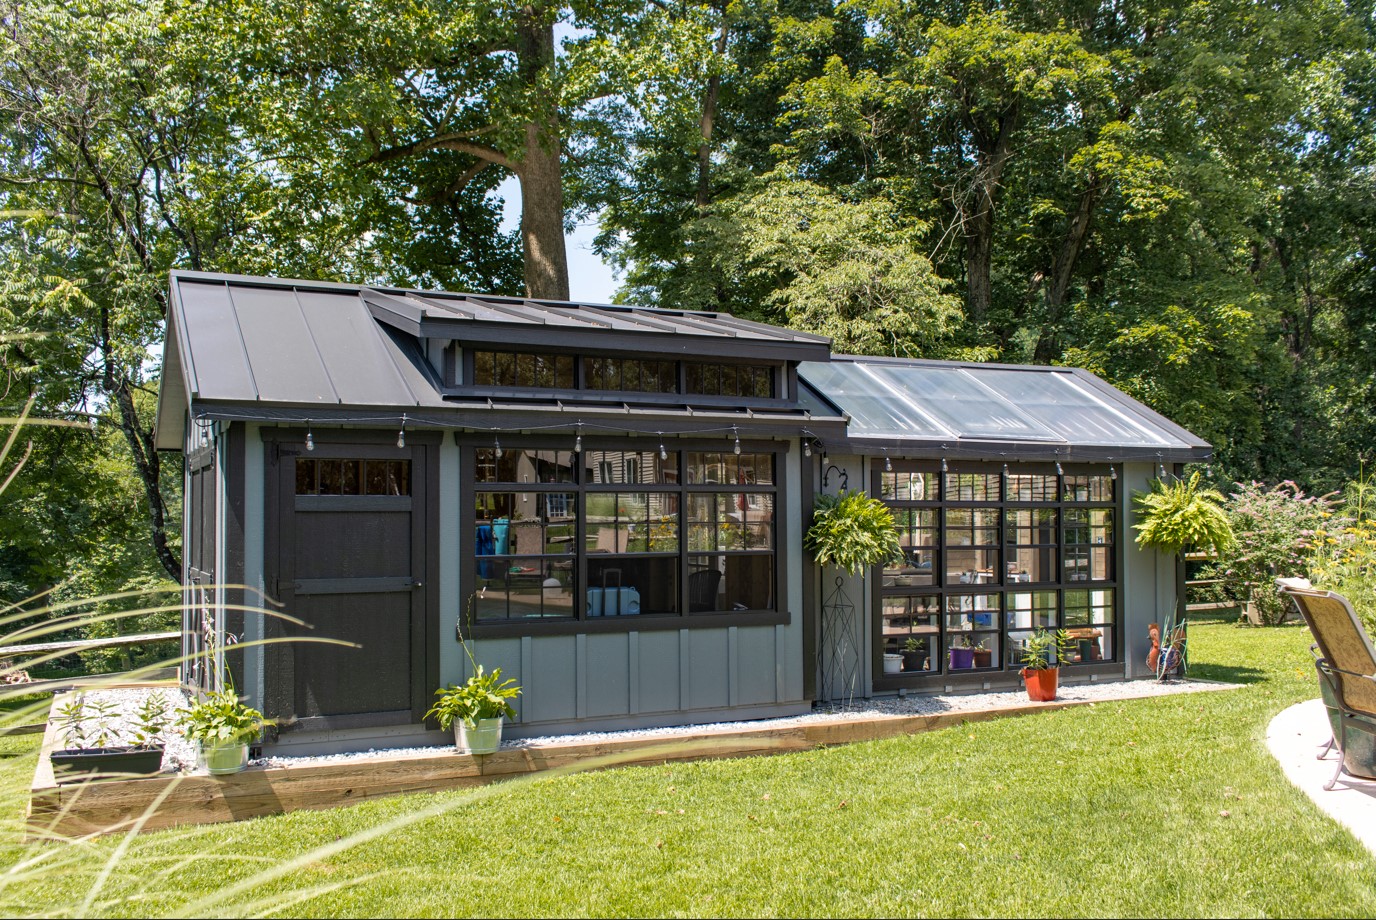 Exterior of a Combo Greenhouse with teal and black siding